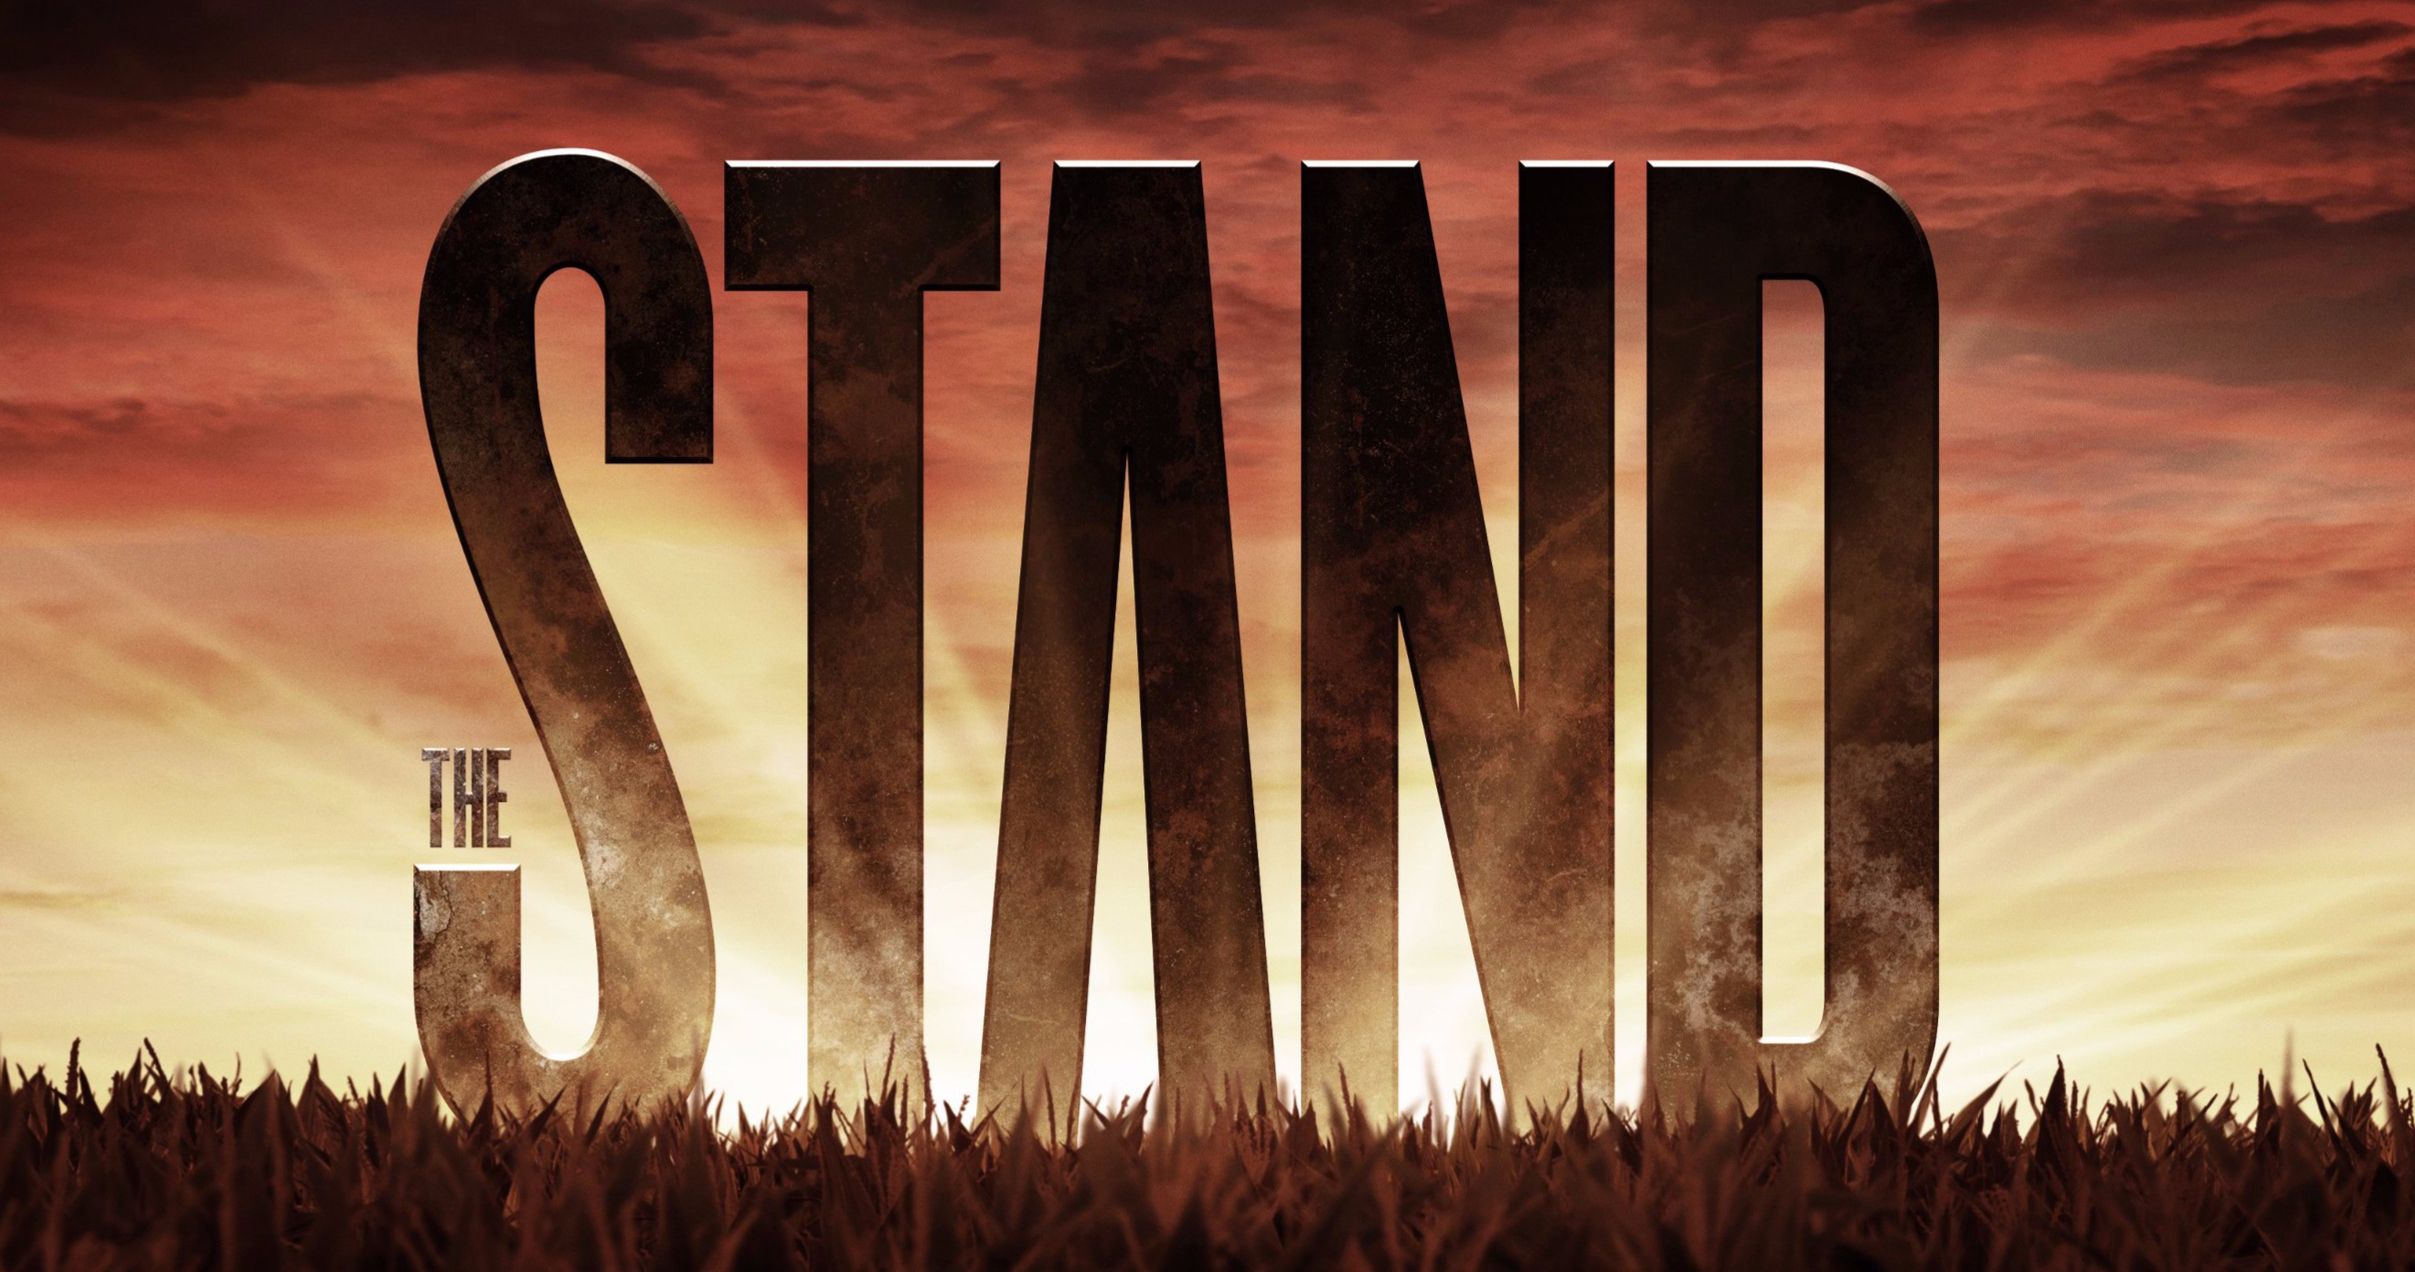 Stephen King's The Stand Poster Announces Holiday Premiere Date on CBS All Access